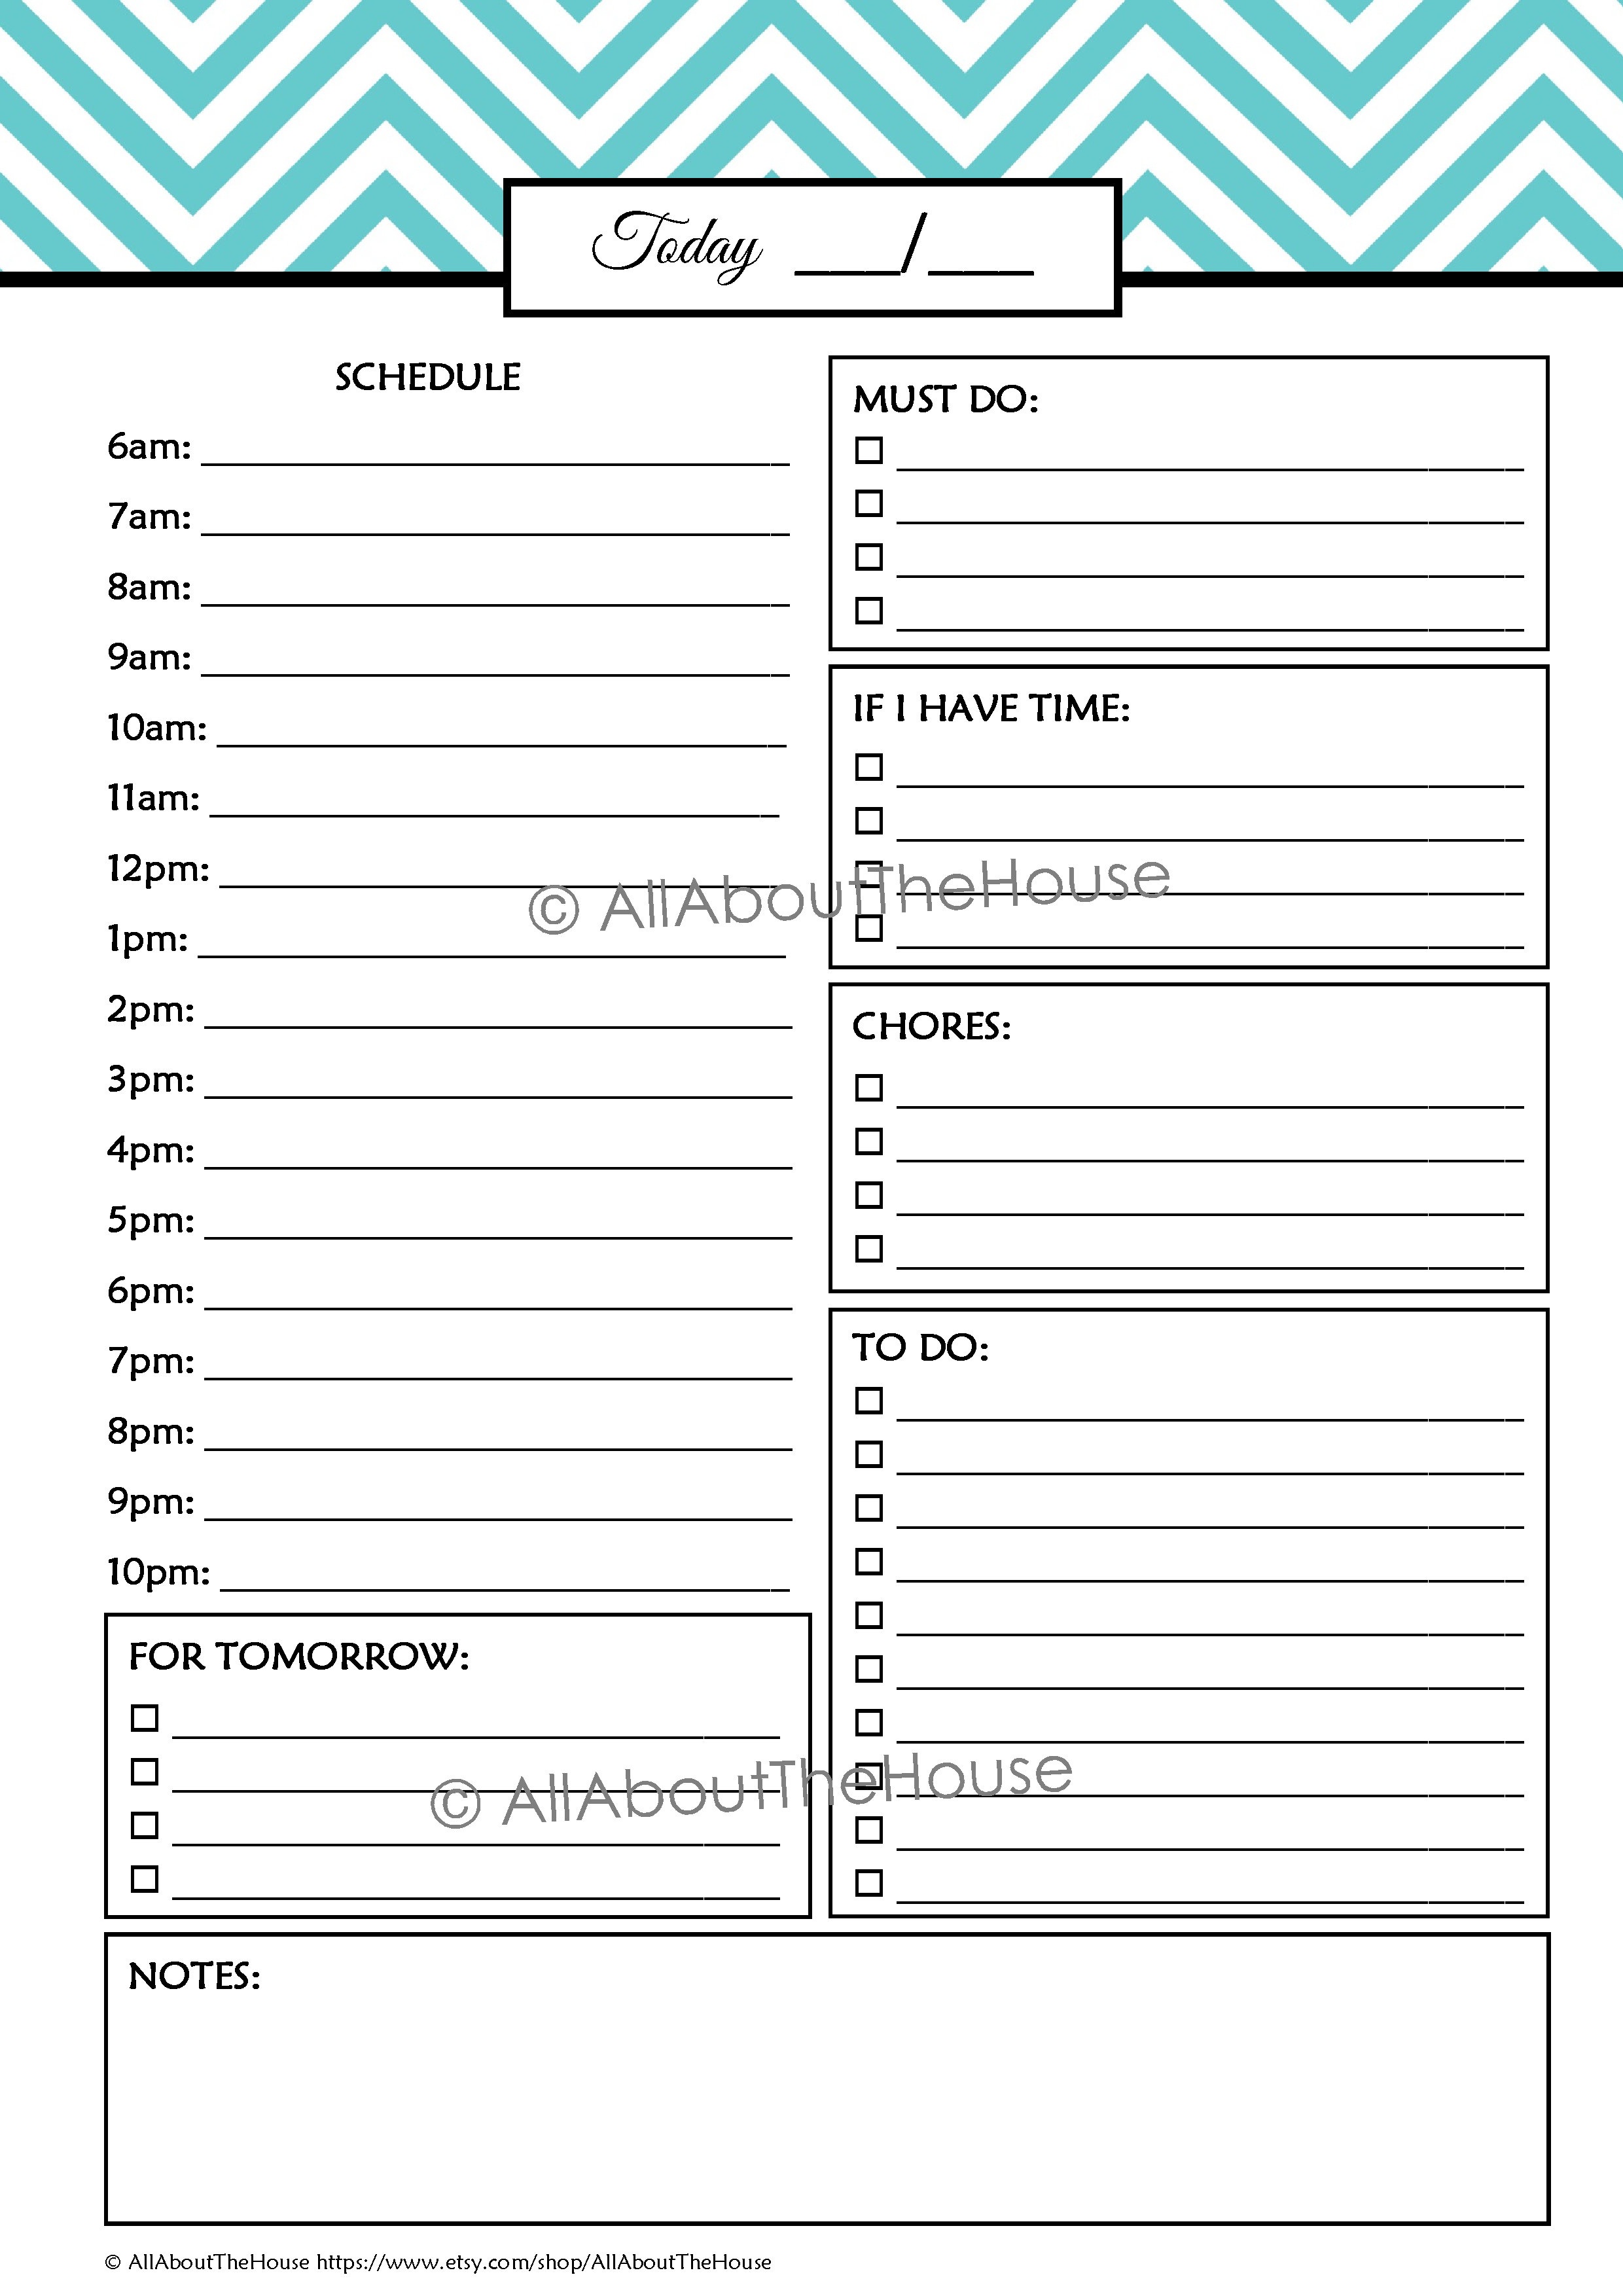 Free Printable Student Planner Template | Shop Fresh - Free Printable School Agenda Templates